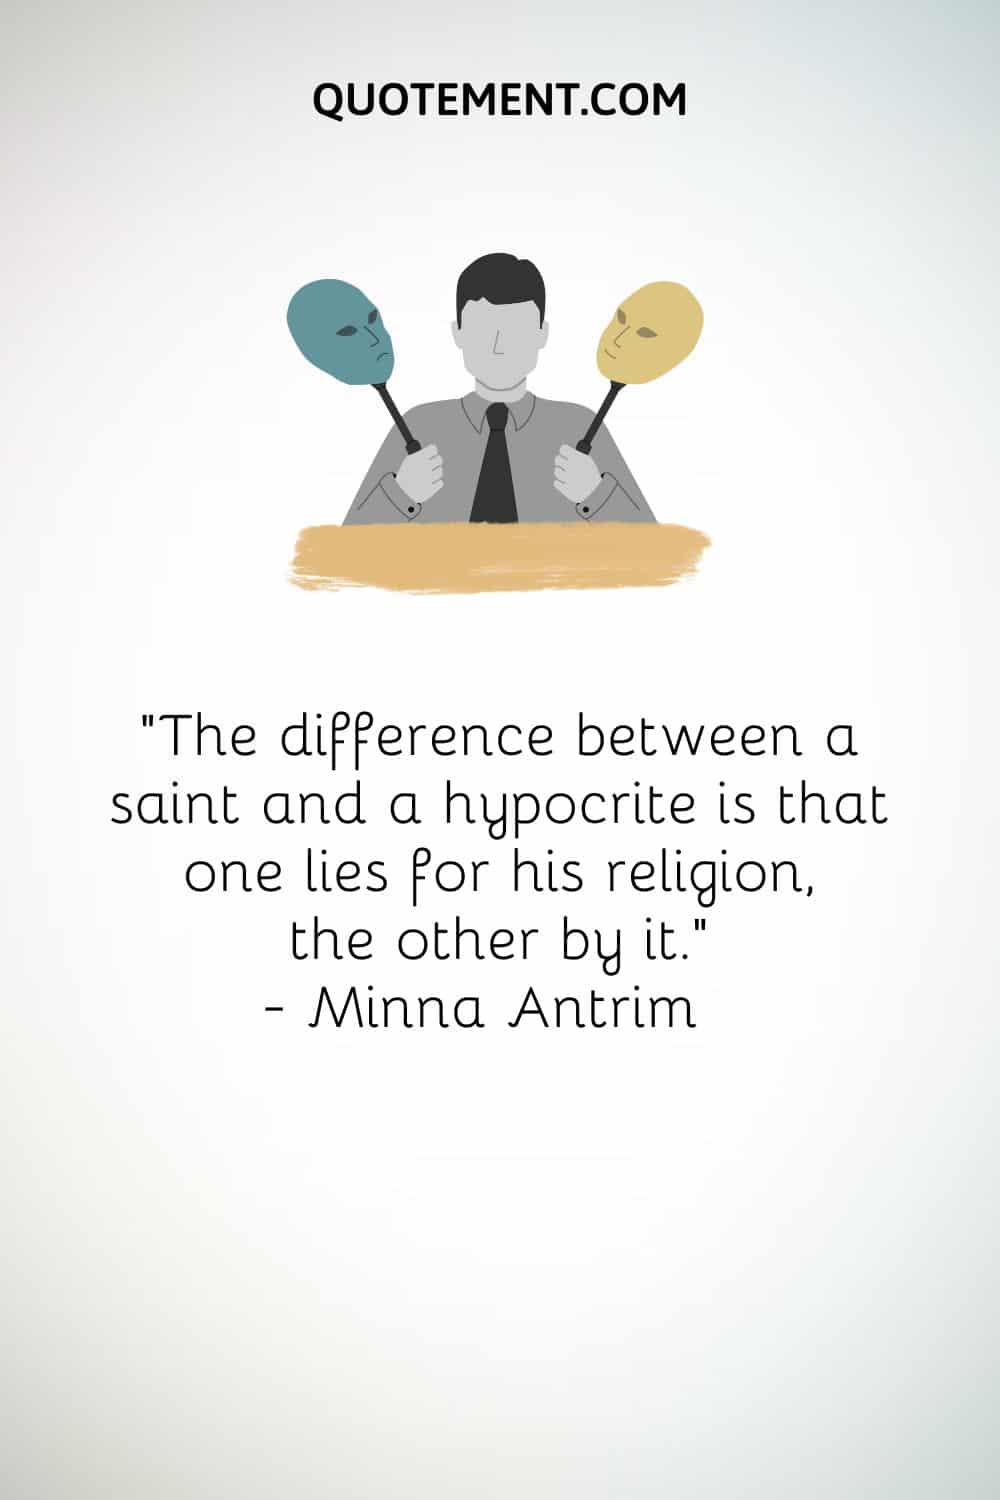 “The difference between a saint and a hypocrite is that one lies for his religion, the other by it.” — Minna Antrim.